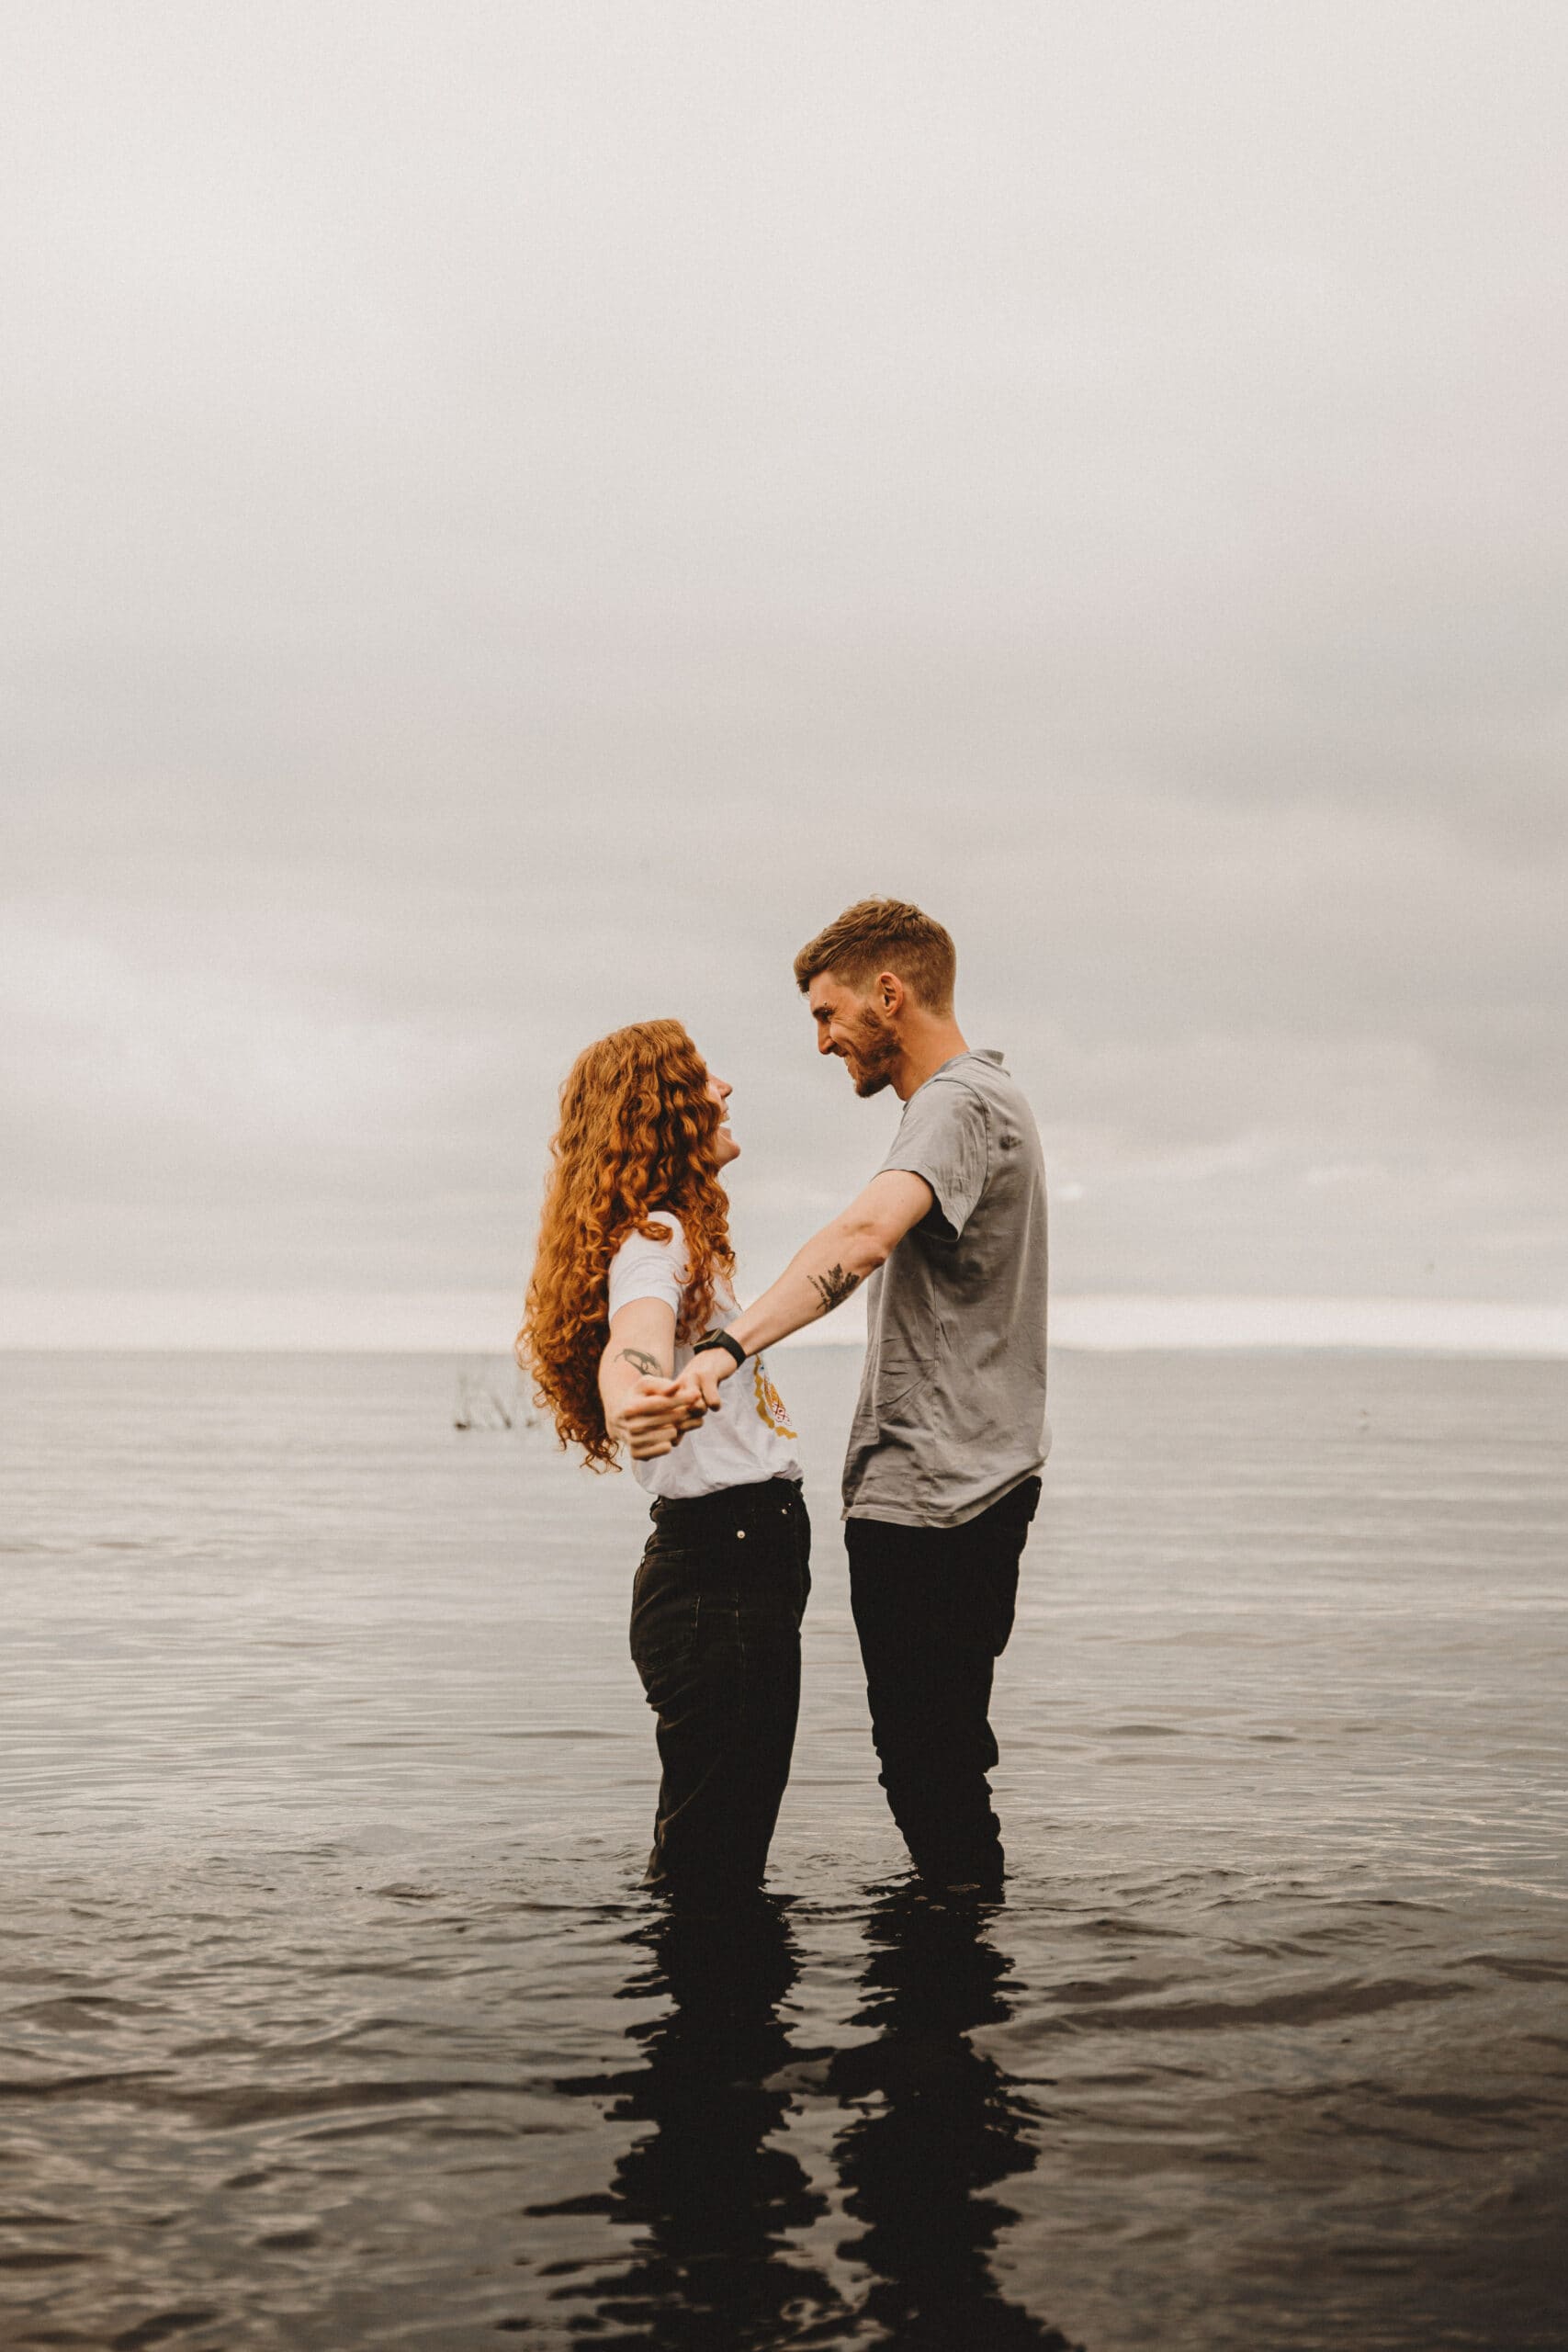 About: A couple standing in the water in front of a cloudy sky.